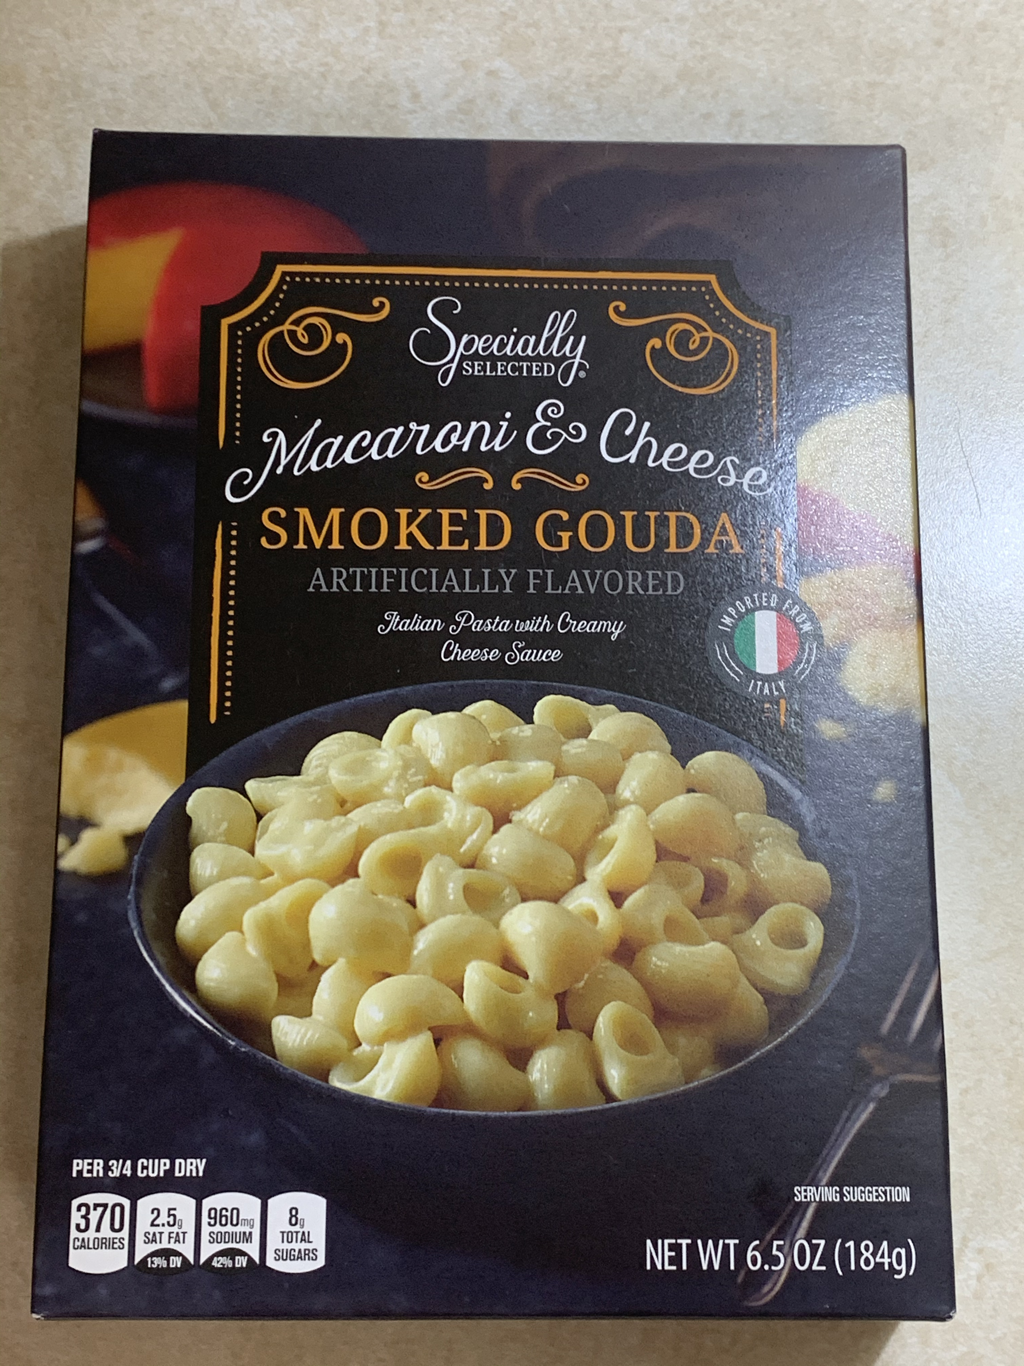 Specially Selected Smoked Gouda Macaroni Cheese Aldi Review - Nutrition Facts & Ingredients 